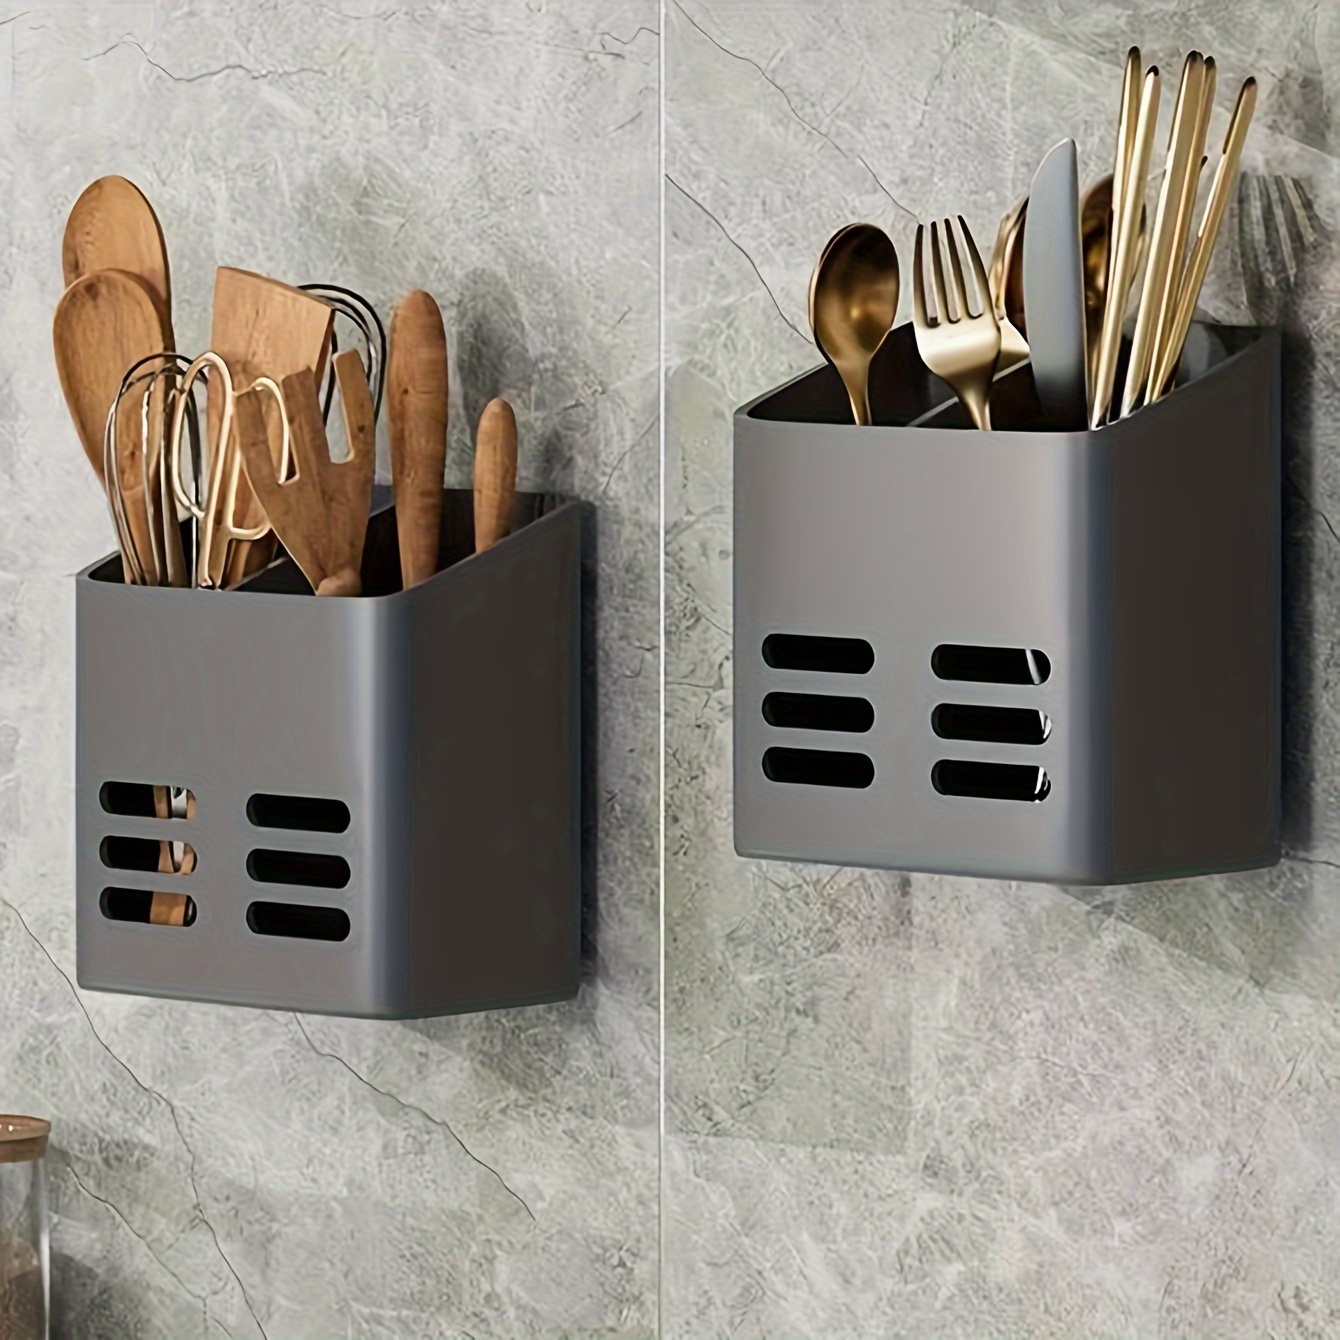 

Space-saving Wall-mounted Utensil Holder With Drain Basket - Multifunctional, No-drill Storage Organizer For Kitchen & Bathroom